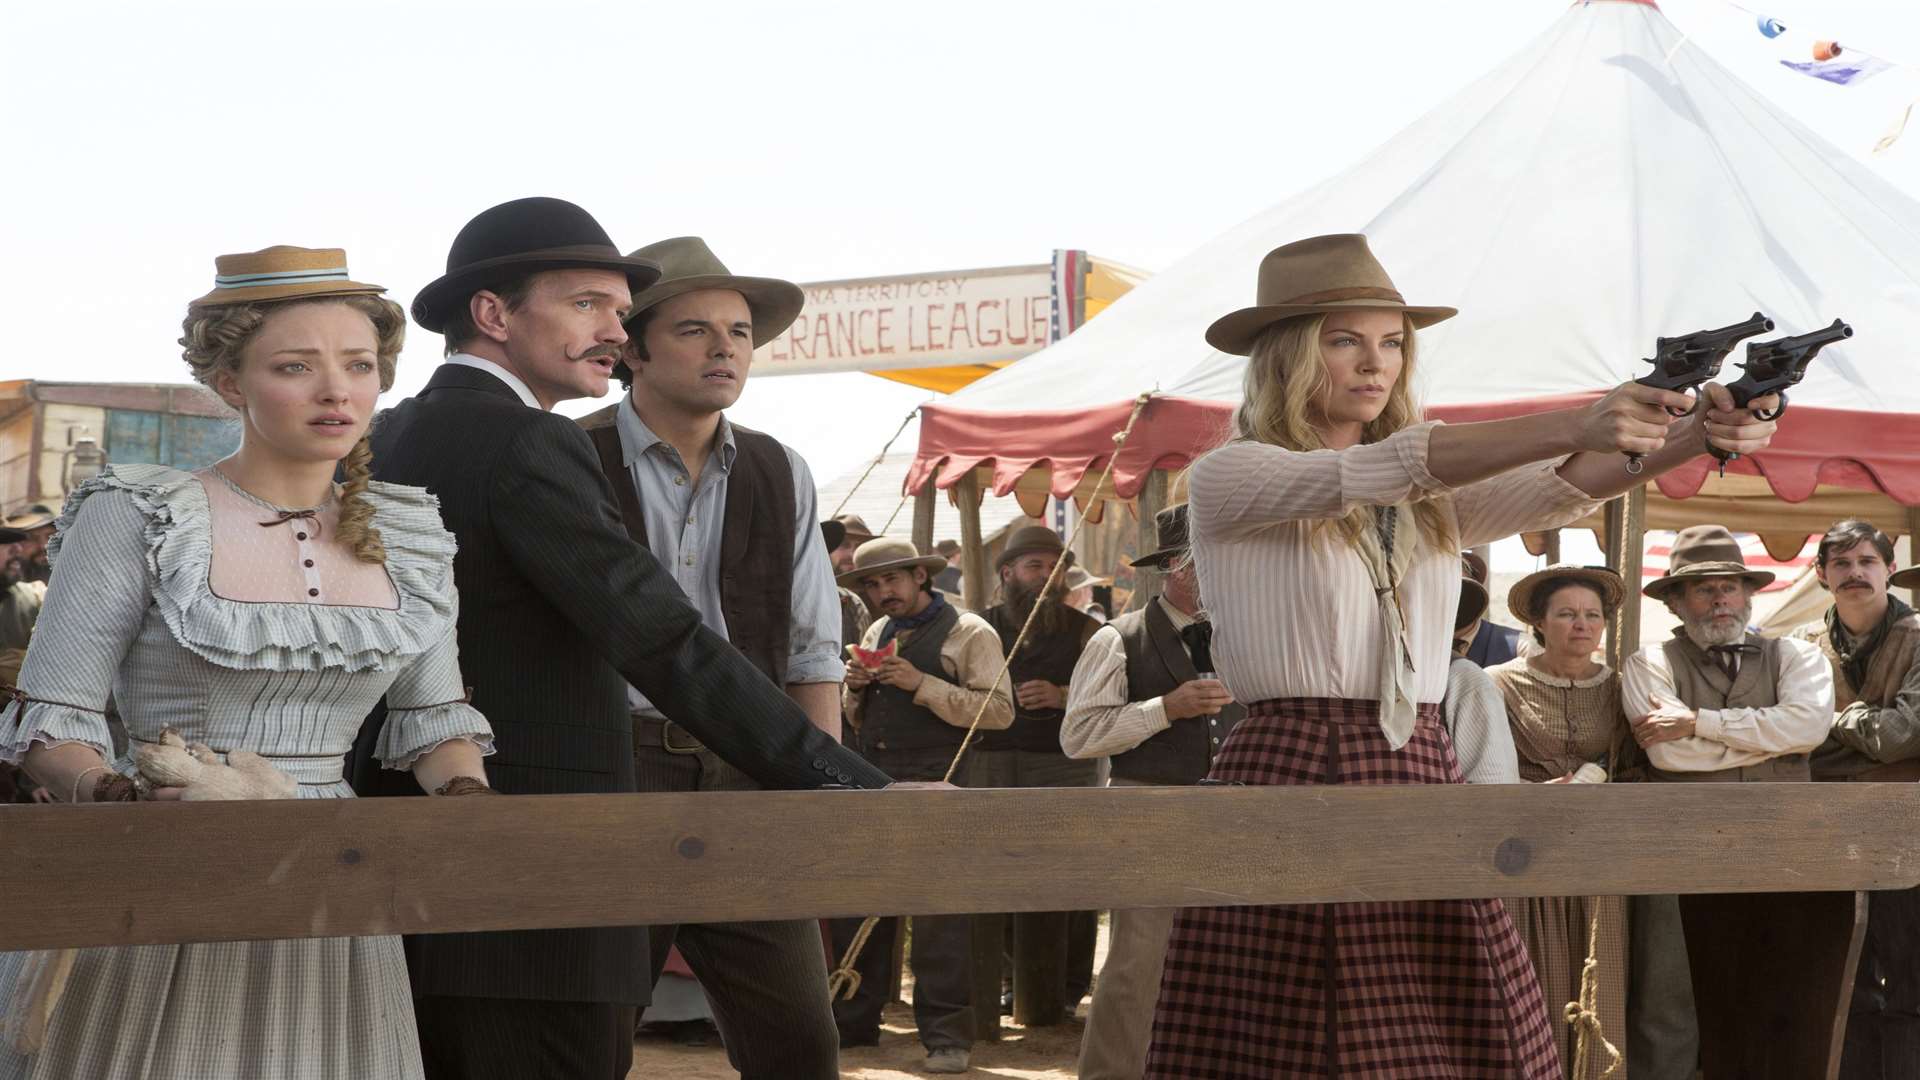 A Million Ways To Die In The West, with Louise (Amanda Seyfried), Foy (Neil Patrick Harris), Albert (Seth MacFarlane) and Anna (Charlize Theron). Picture: PA Photo/UPI Media